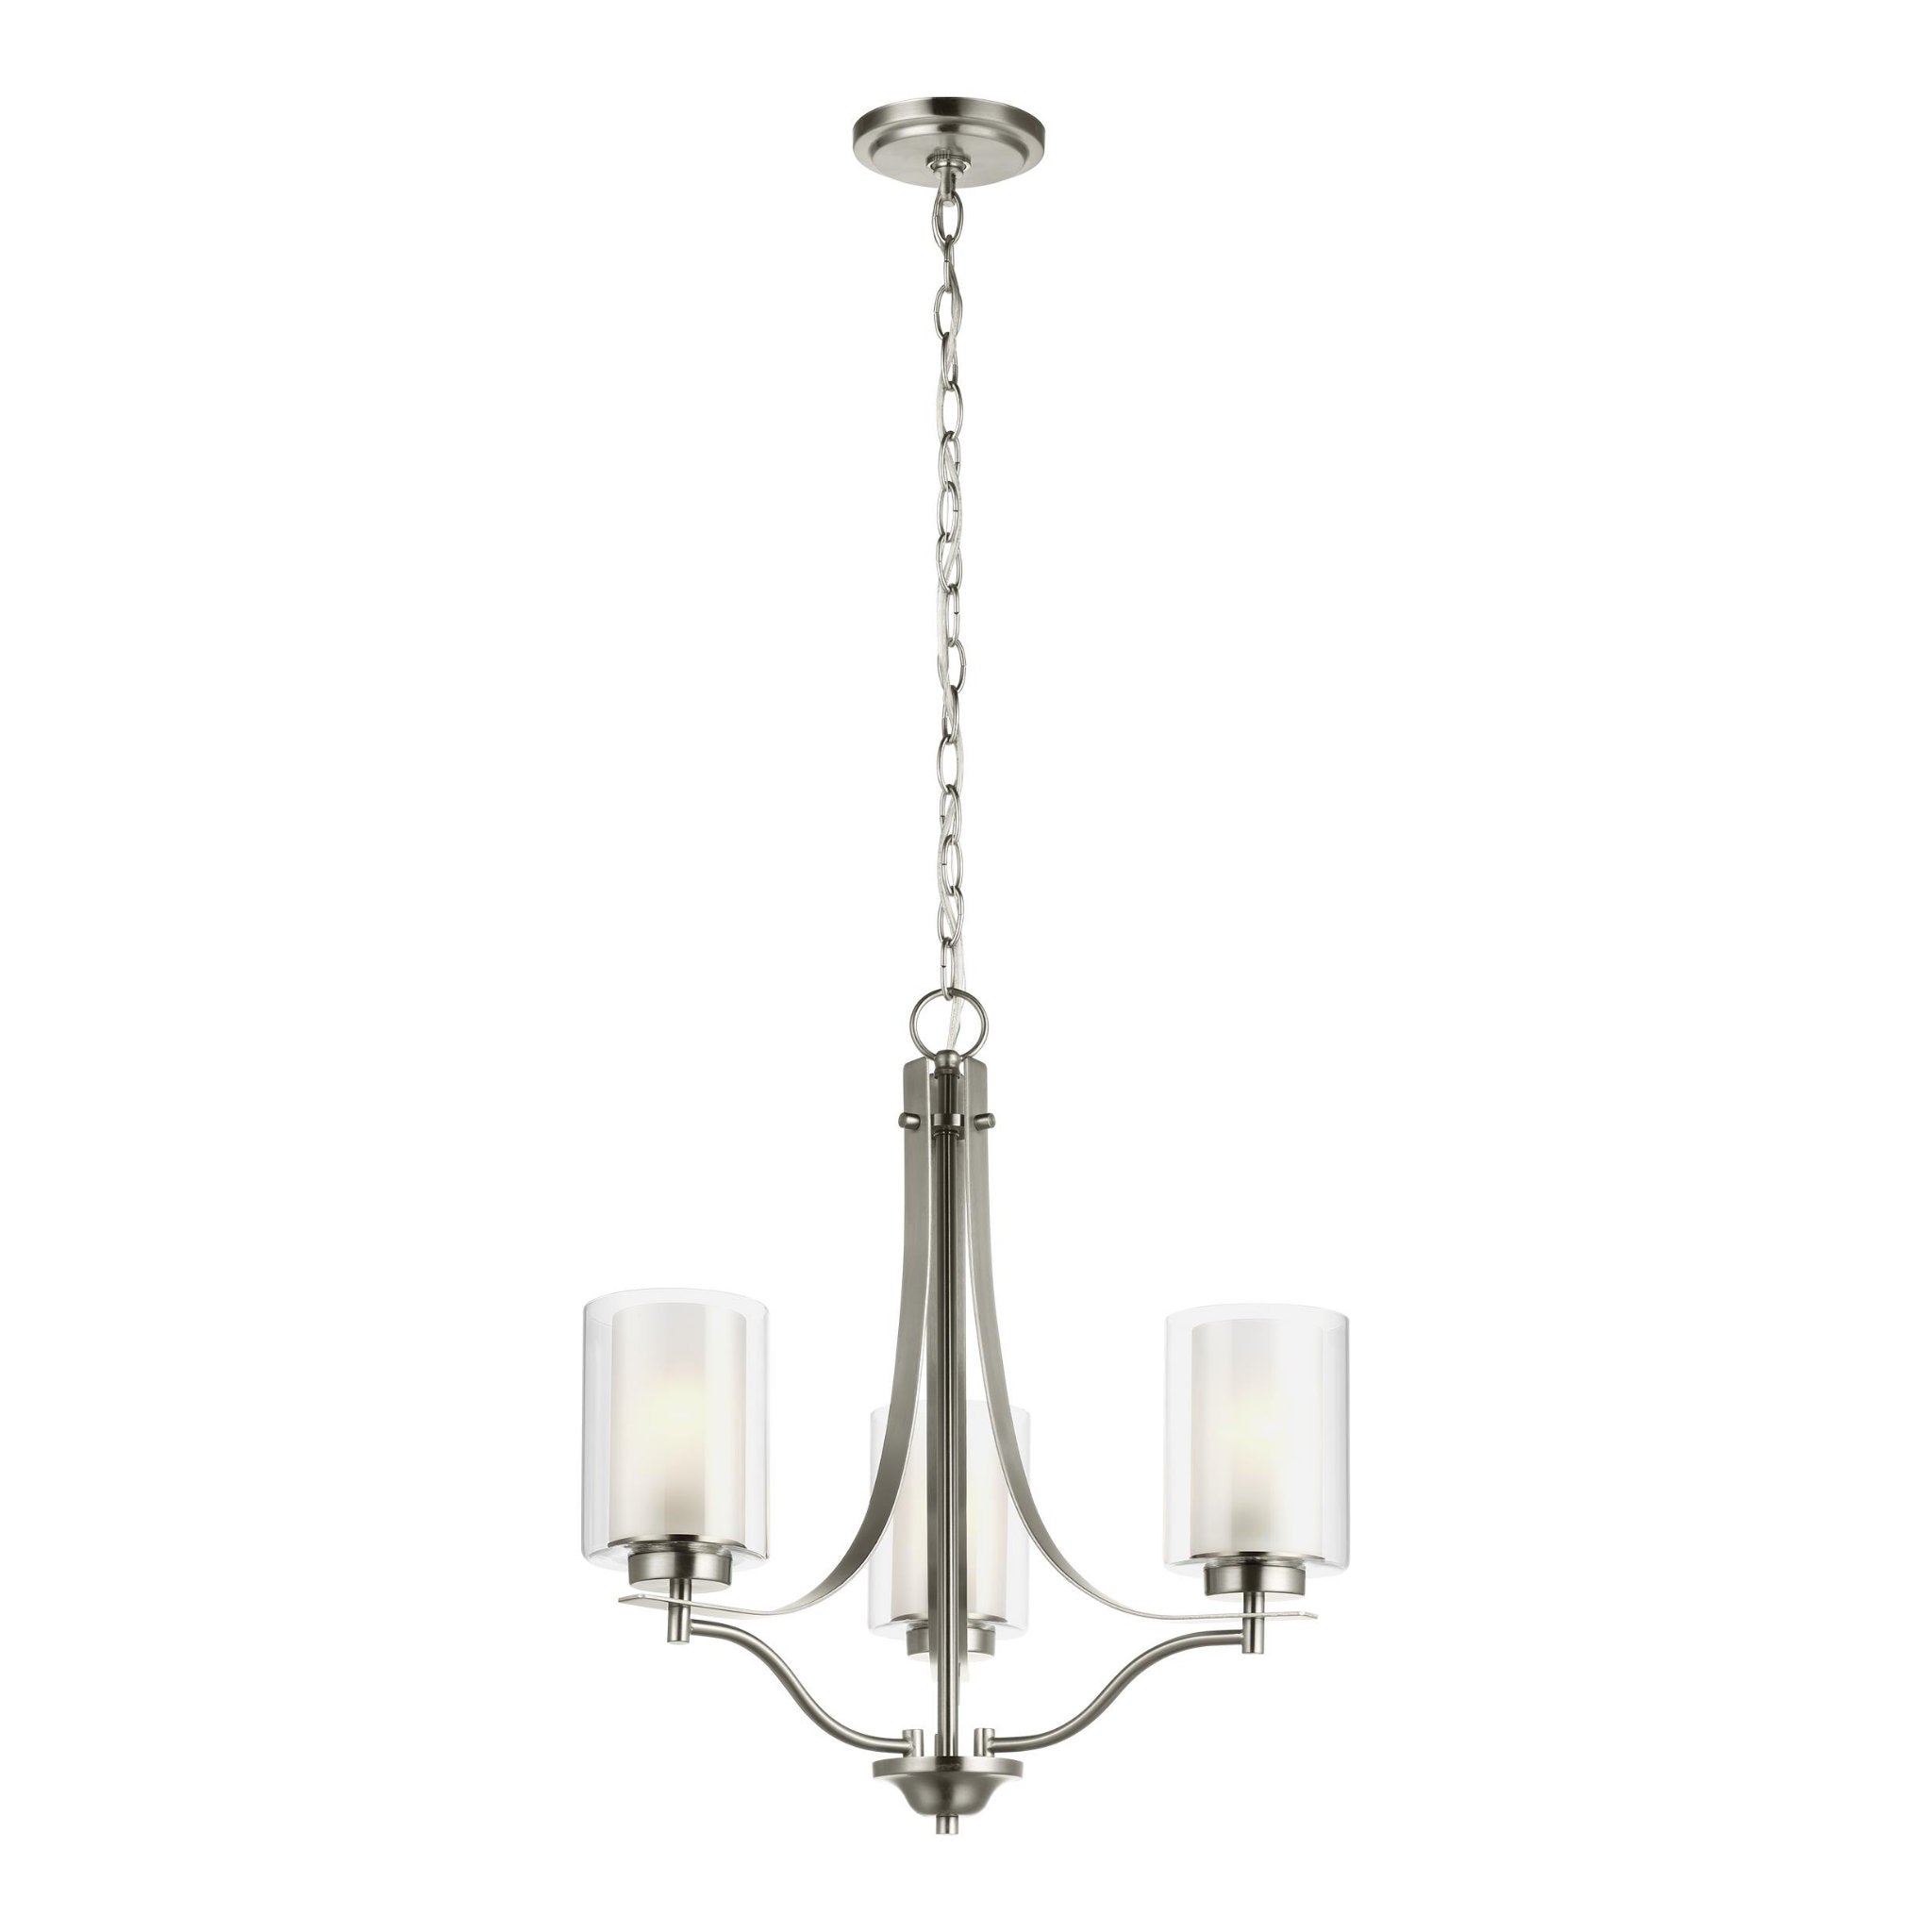 Elmwood Park Three Light Chandelier Traditional 21" Height Steel Round Satin Etched Shade in Brushed Nickel